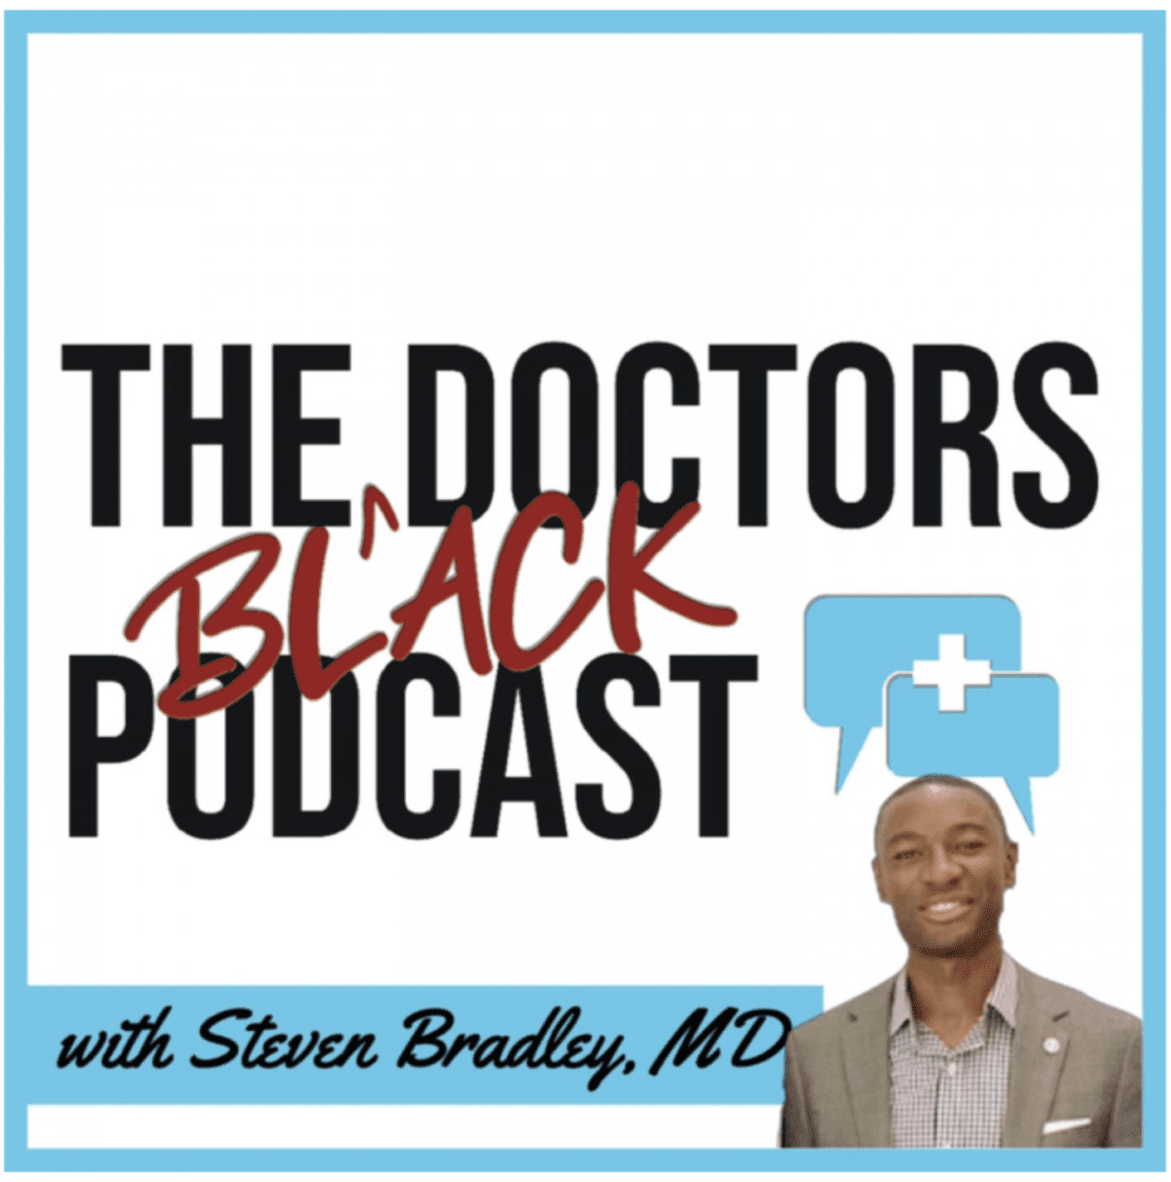 Black Podcasting - Psychiatrists Discuss: The State of Mental Health in the Black Community